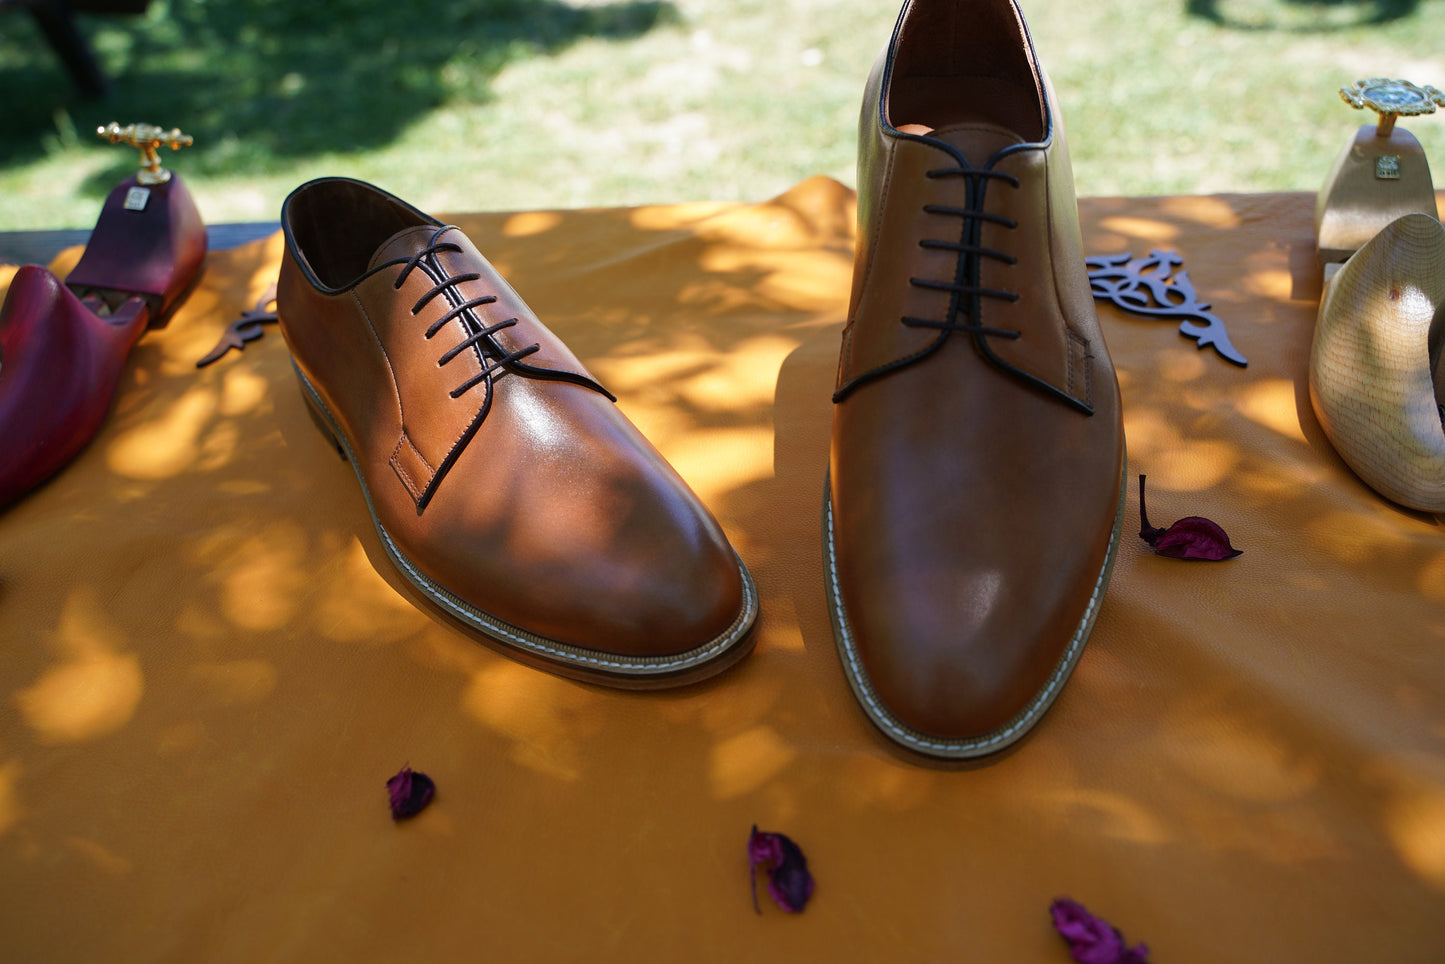 Oxford Shoes Outfit Men Oxford Shoes Casual Custom Size Men Shoes Handcraft Leather Shoes